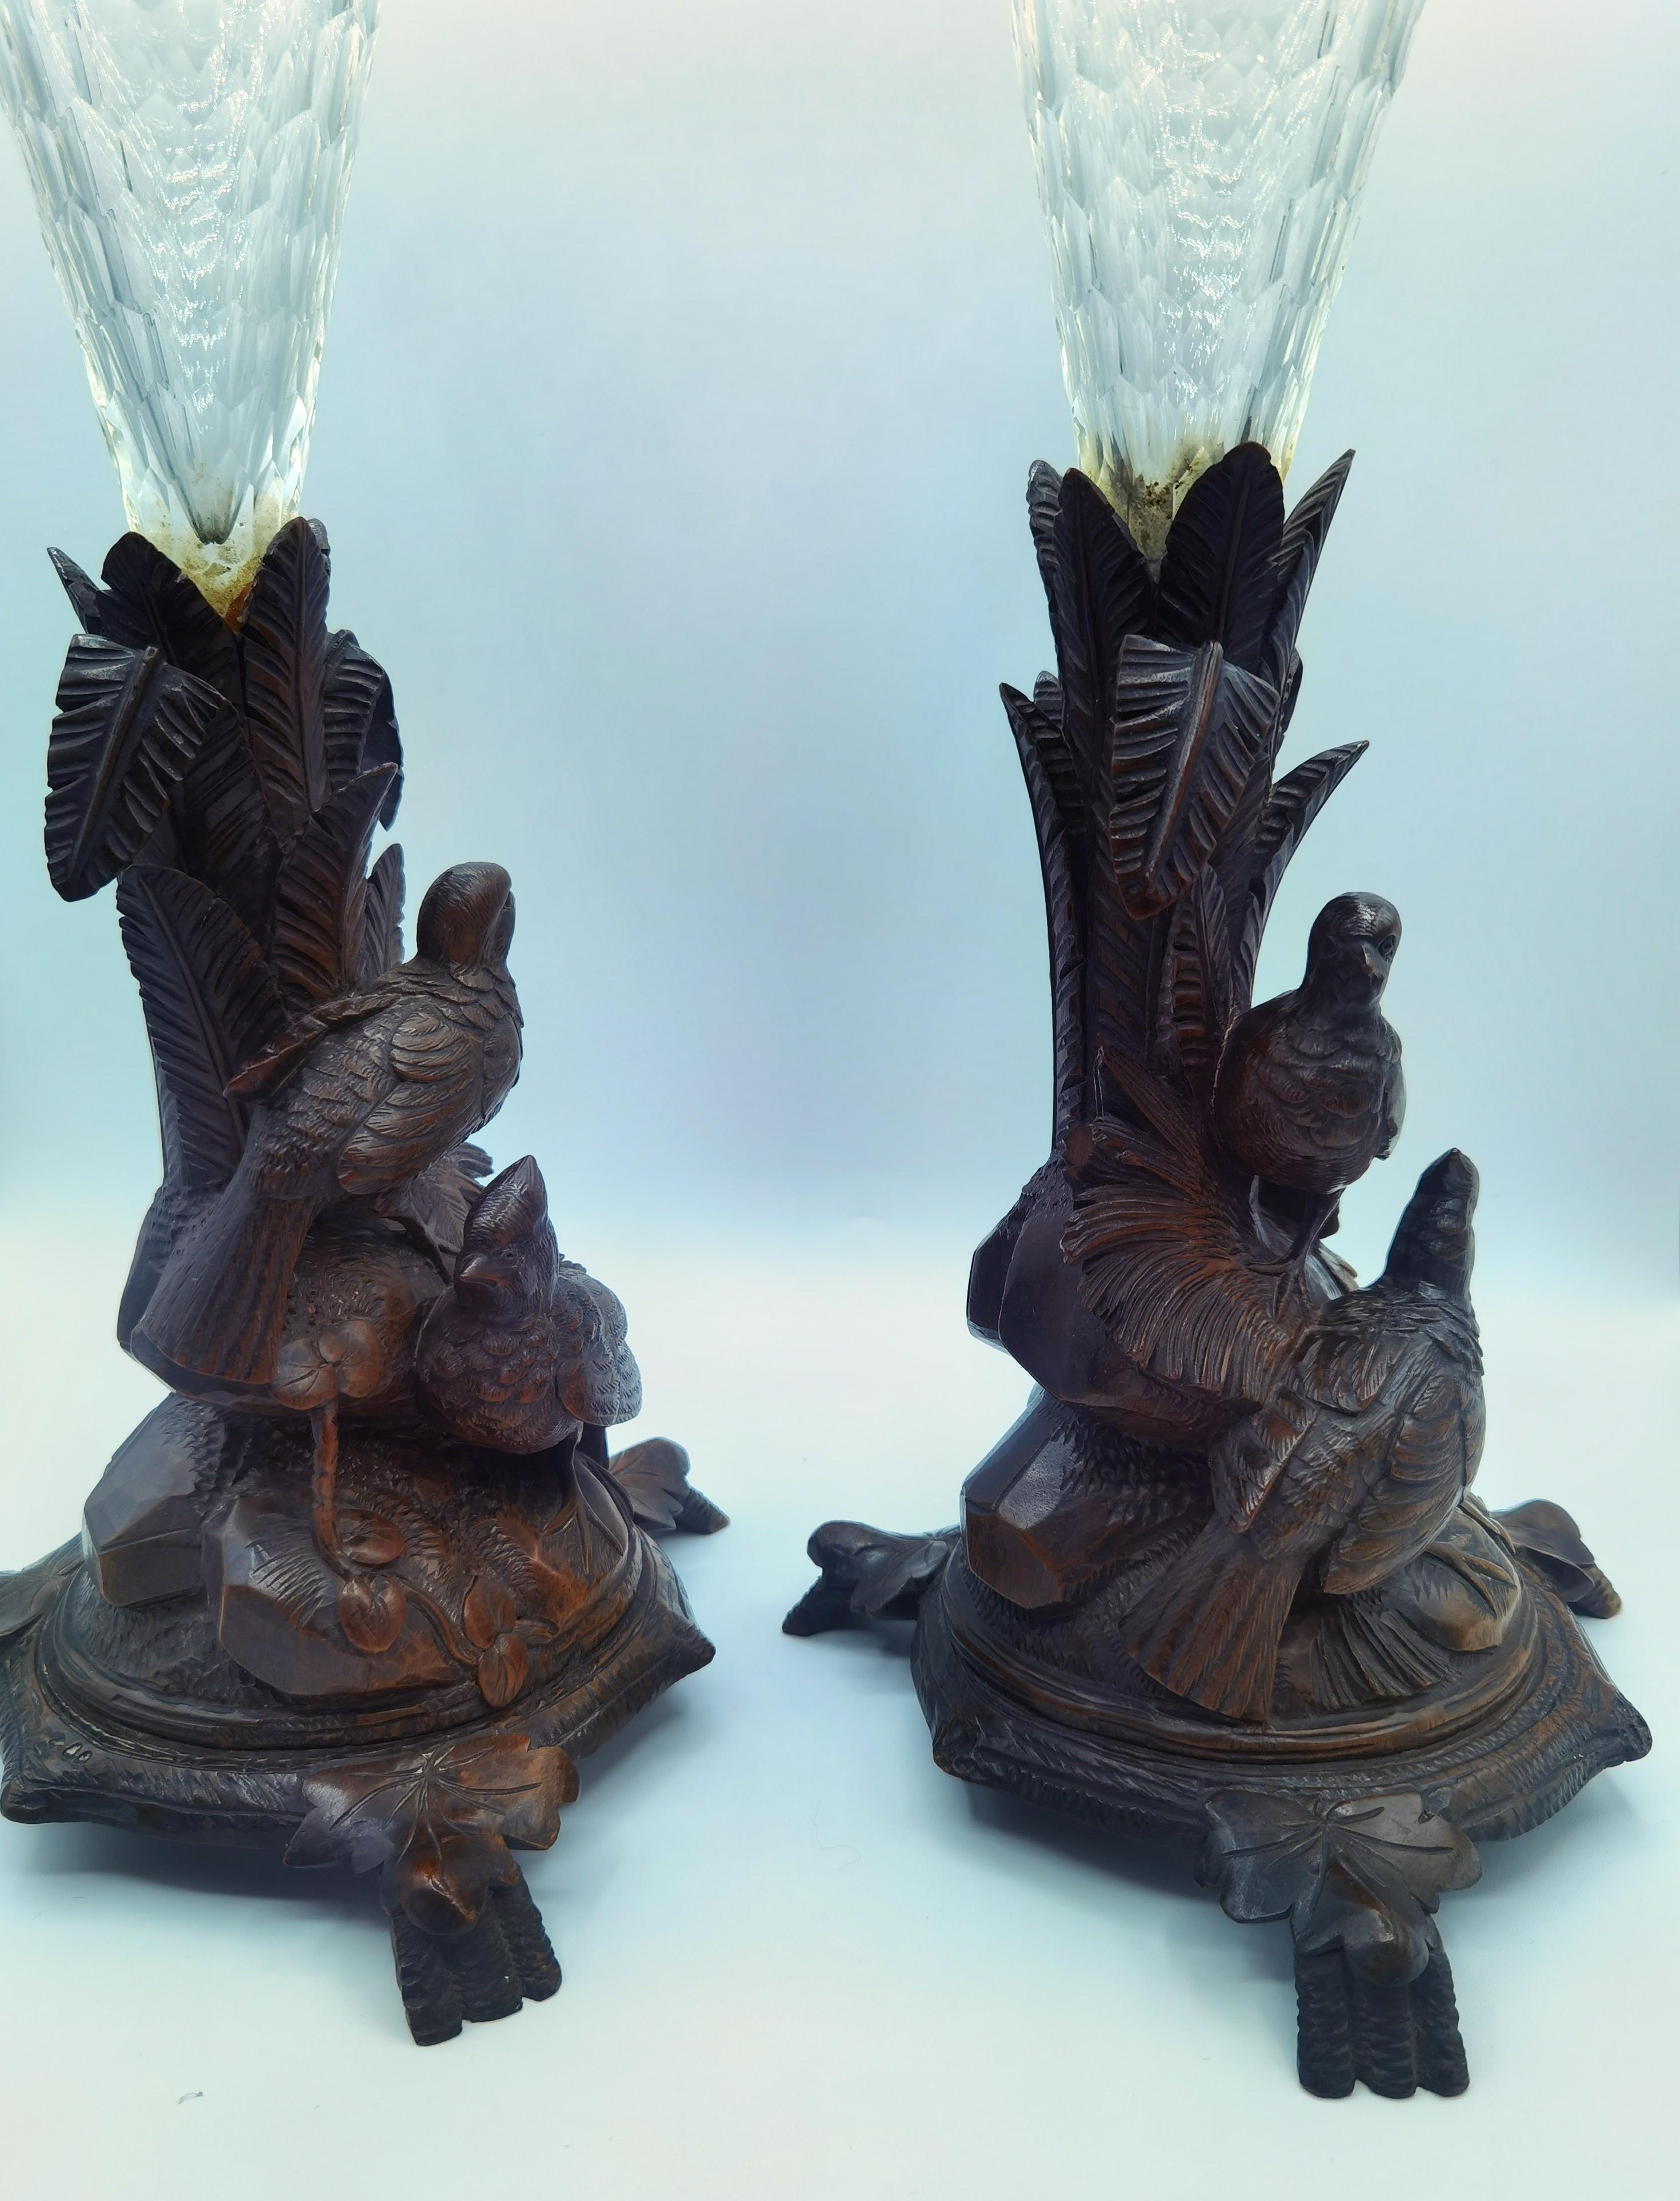 Pair of 19th century large hand-carved centerpieces in wood. The vases are showing a pair of birds sitting opposite side hand-carved with leaves. The centerpieces are in two parts. The crystal glass for flower decoration are hand-engraved and can be